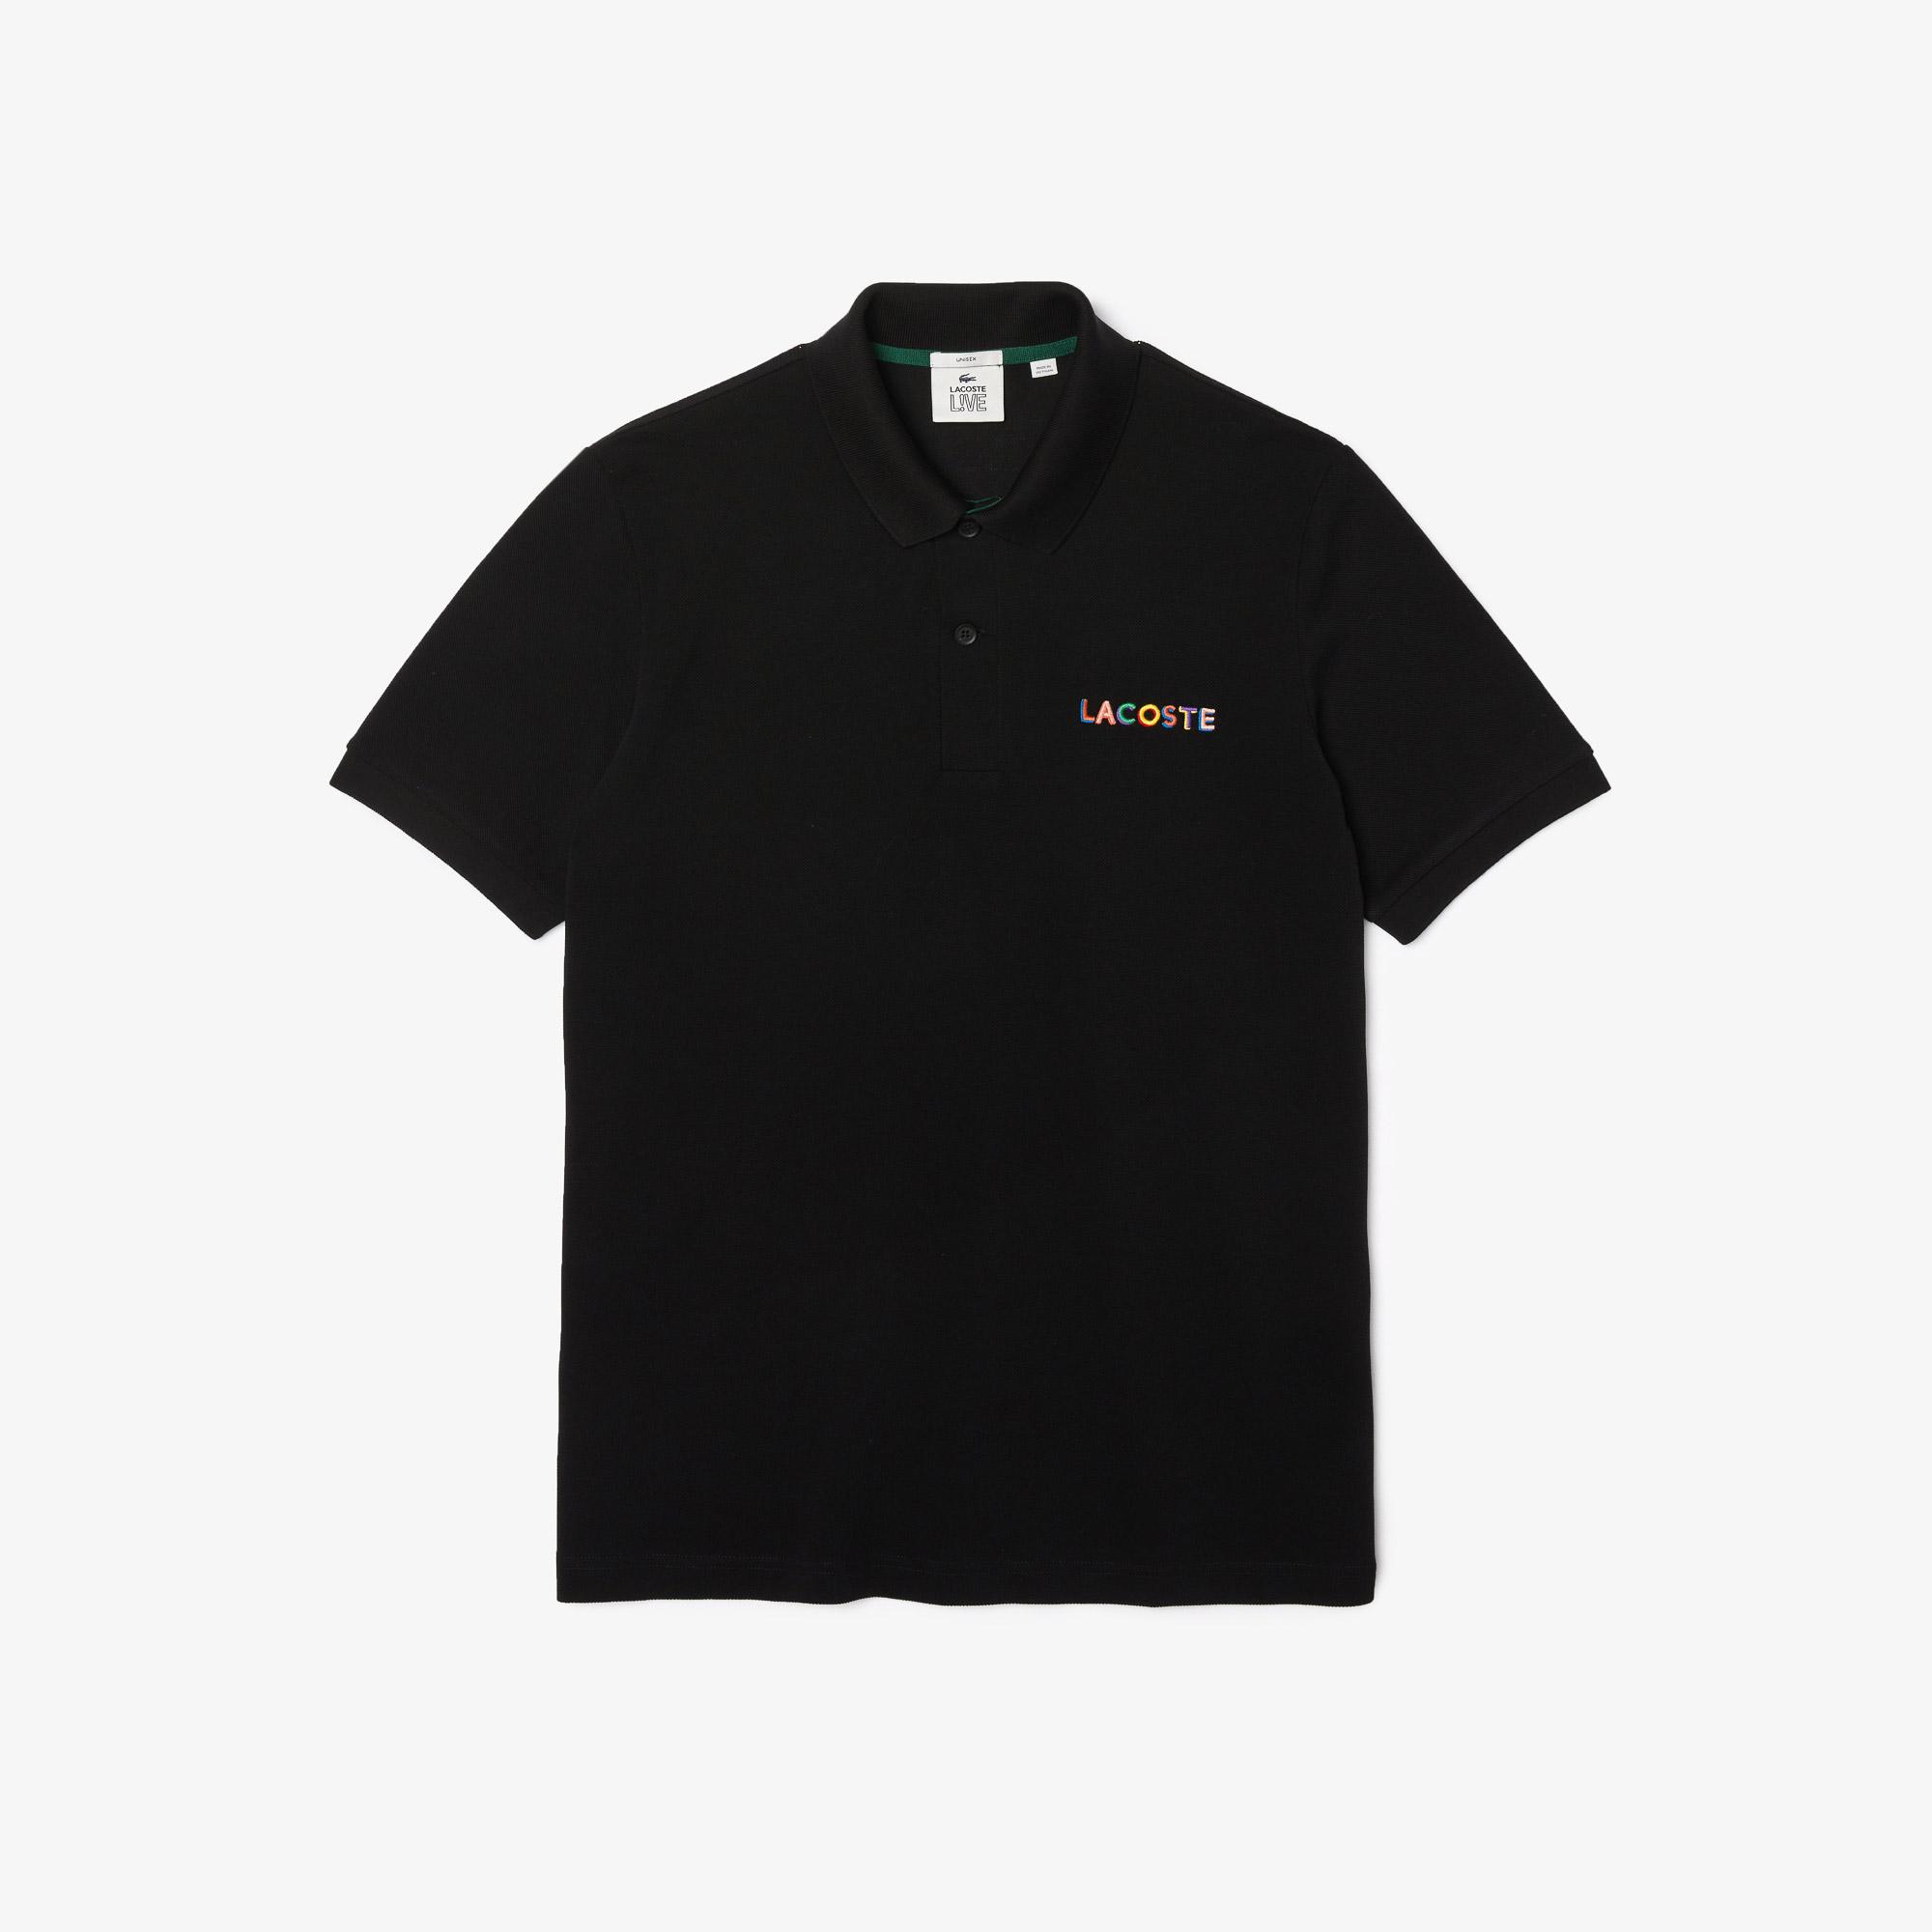 Lacoste L! VE polo shirt with a unisex print in a loose fit